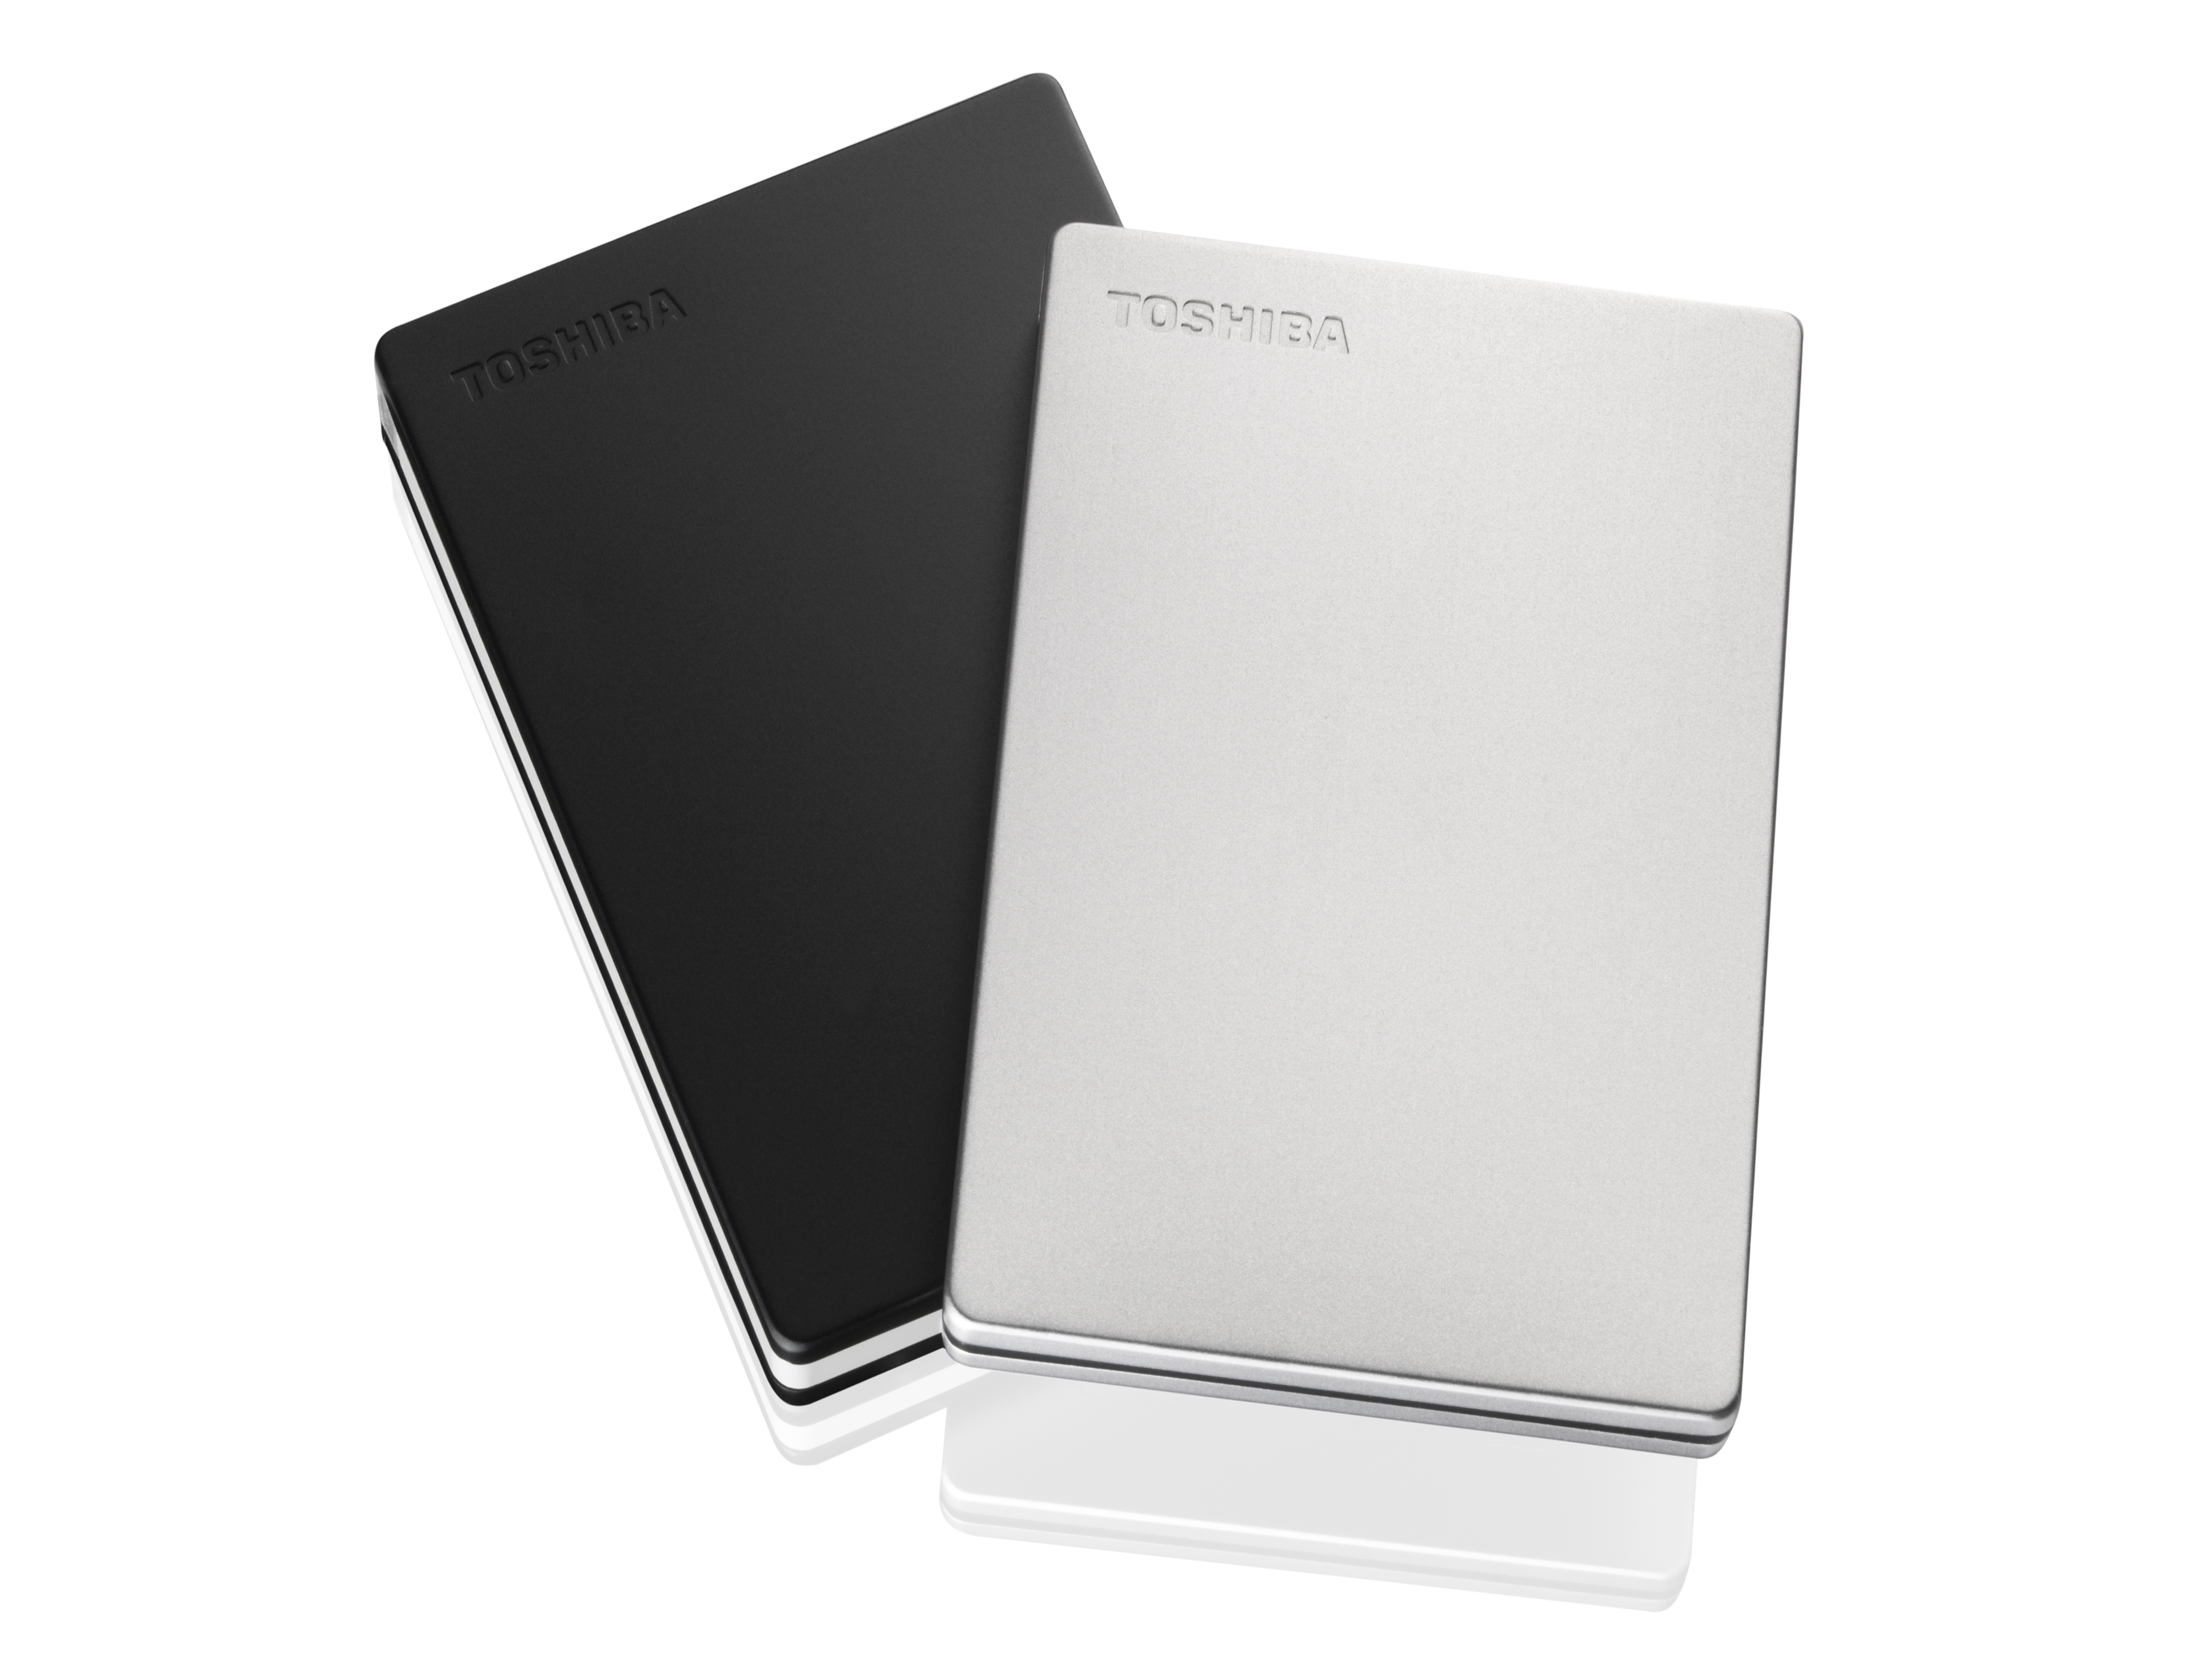 Toshiba releases New Canvio® Portable Storage Lineup with New Applications  and Designs, Toshiba Electronic Devices & Storage Corporation